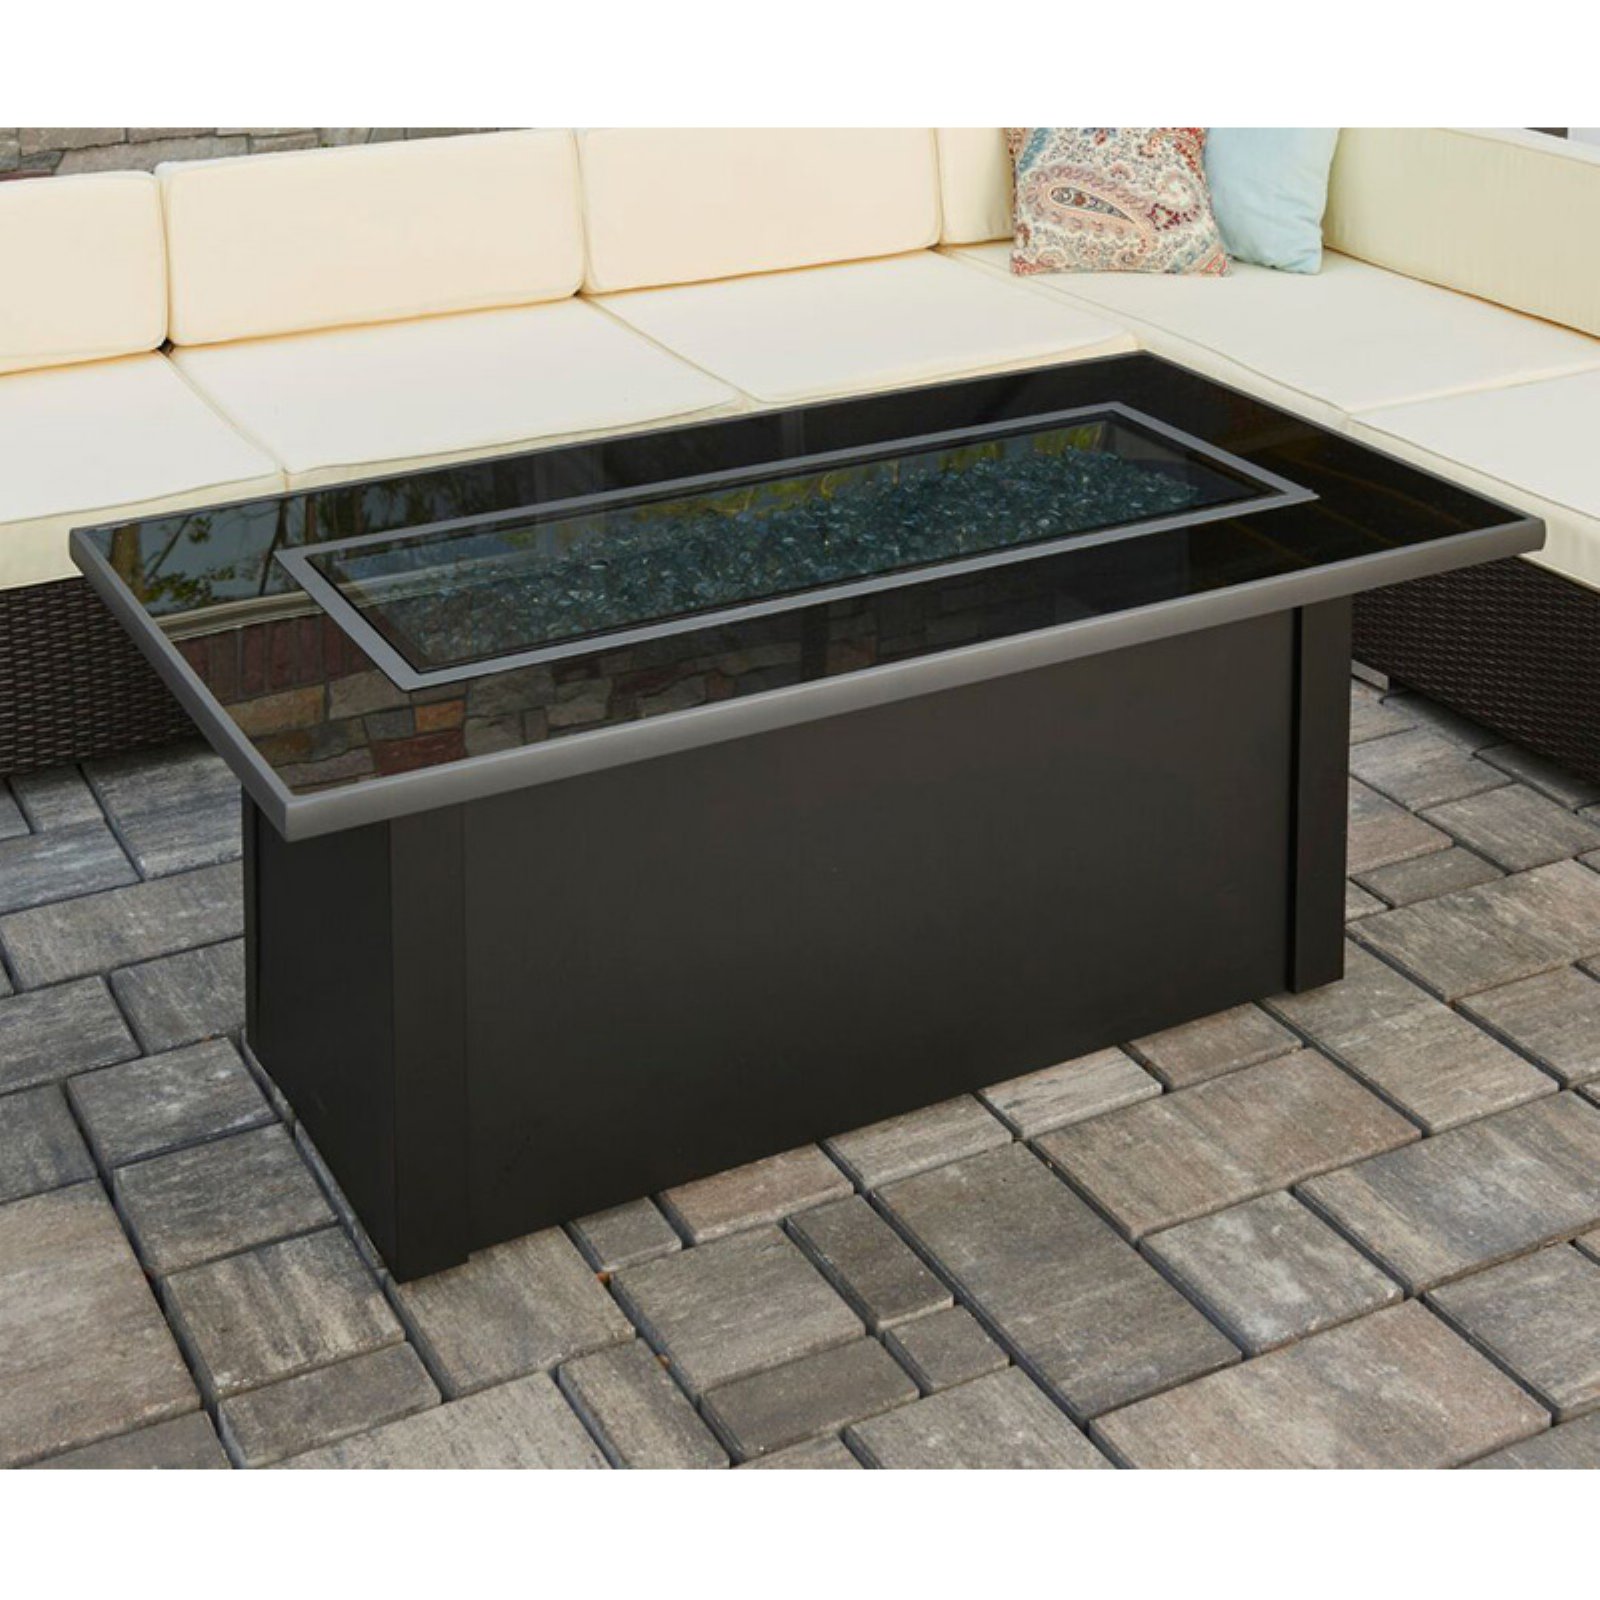 Fireplace Child Gate Unique Outdoor Greatroom Monte Carlo 59 3 In Fire Table with Free Cover